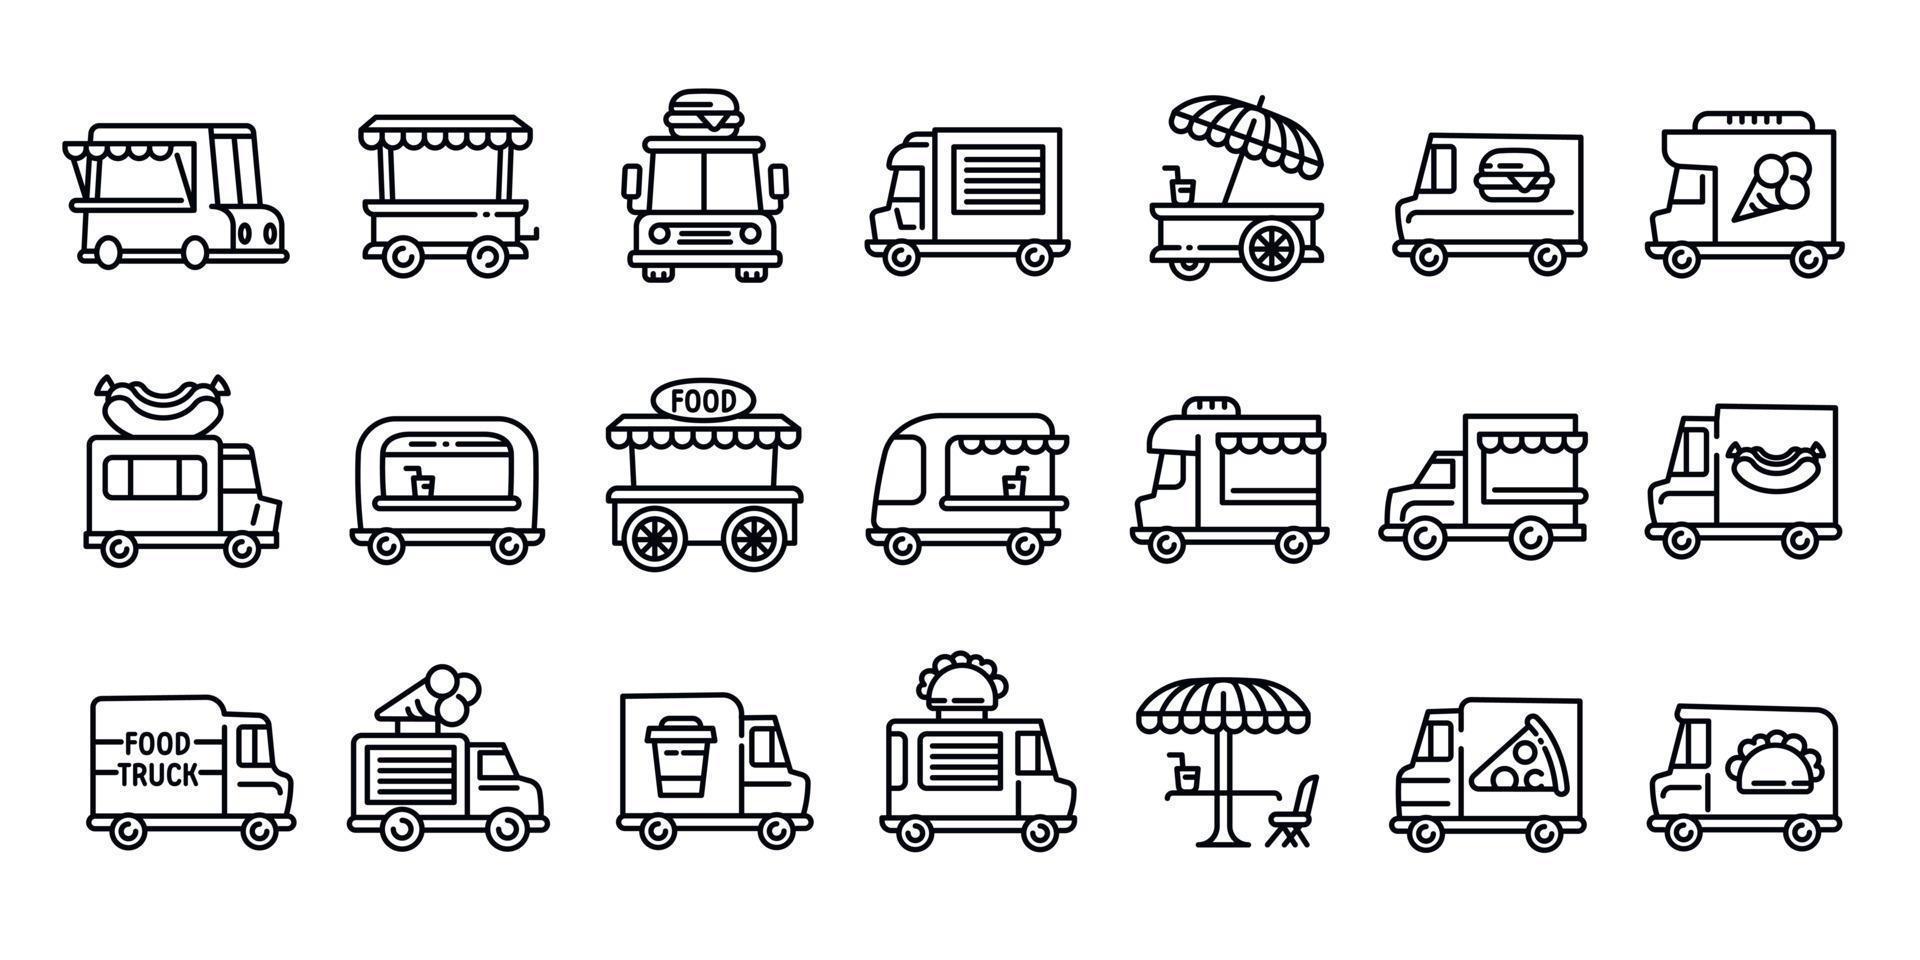 Food truck icons set, outline style vector